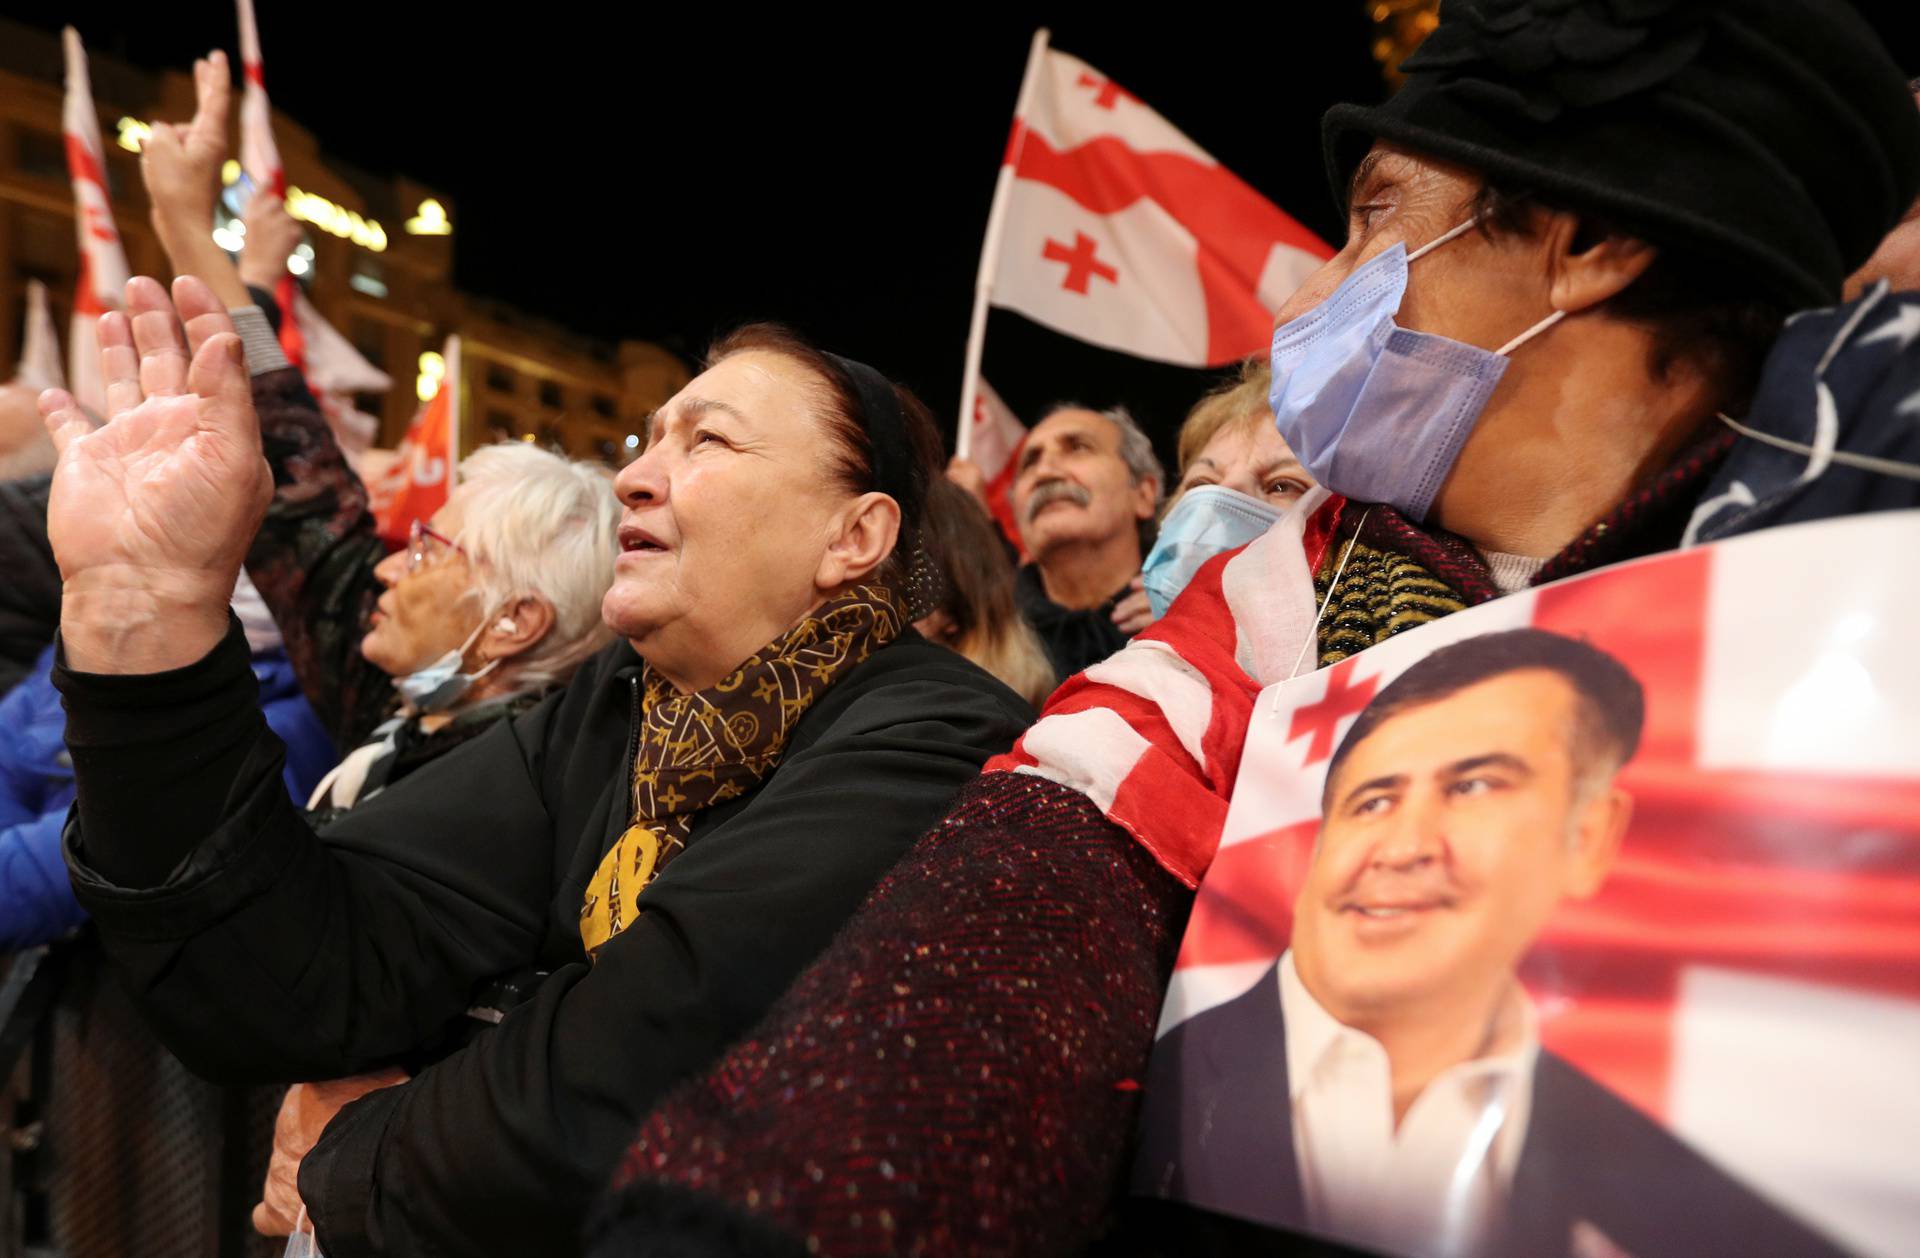 Georgian opposition supporters hold a rally in support of jailed ex-president Saakashvili in Tbilisi